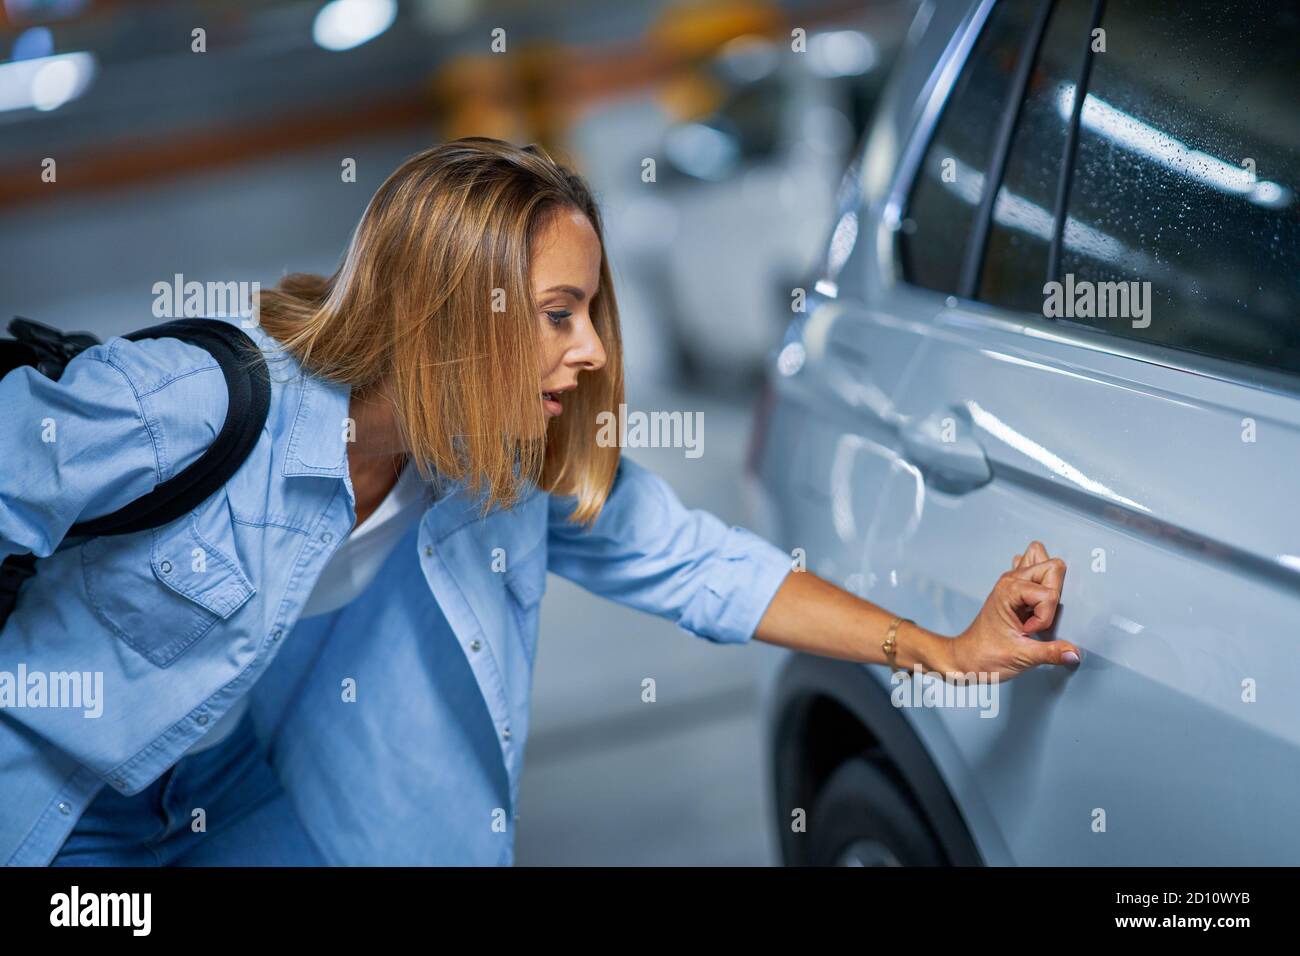 Portrait of young woman with scratched car at underground parking lot Stock Photo